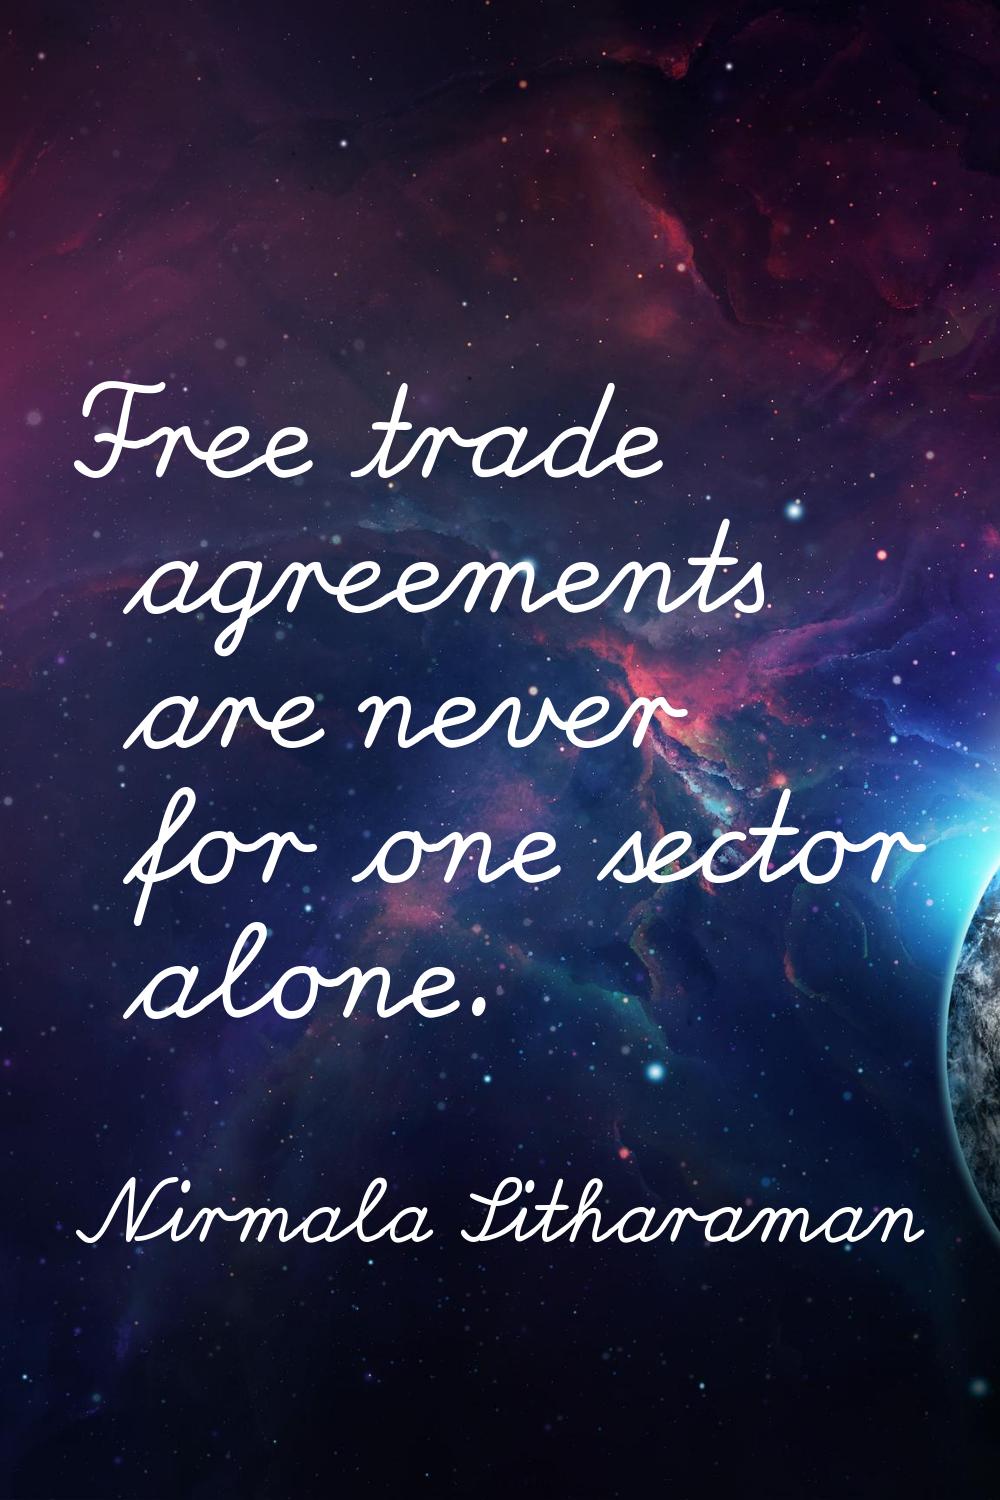 Free trade agreements are never for one sector alone.